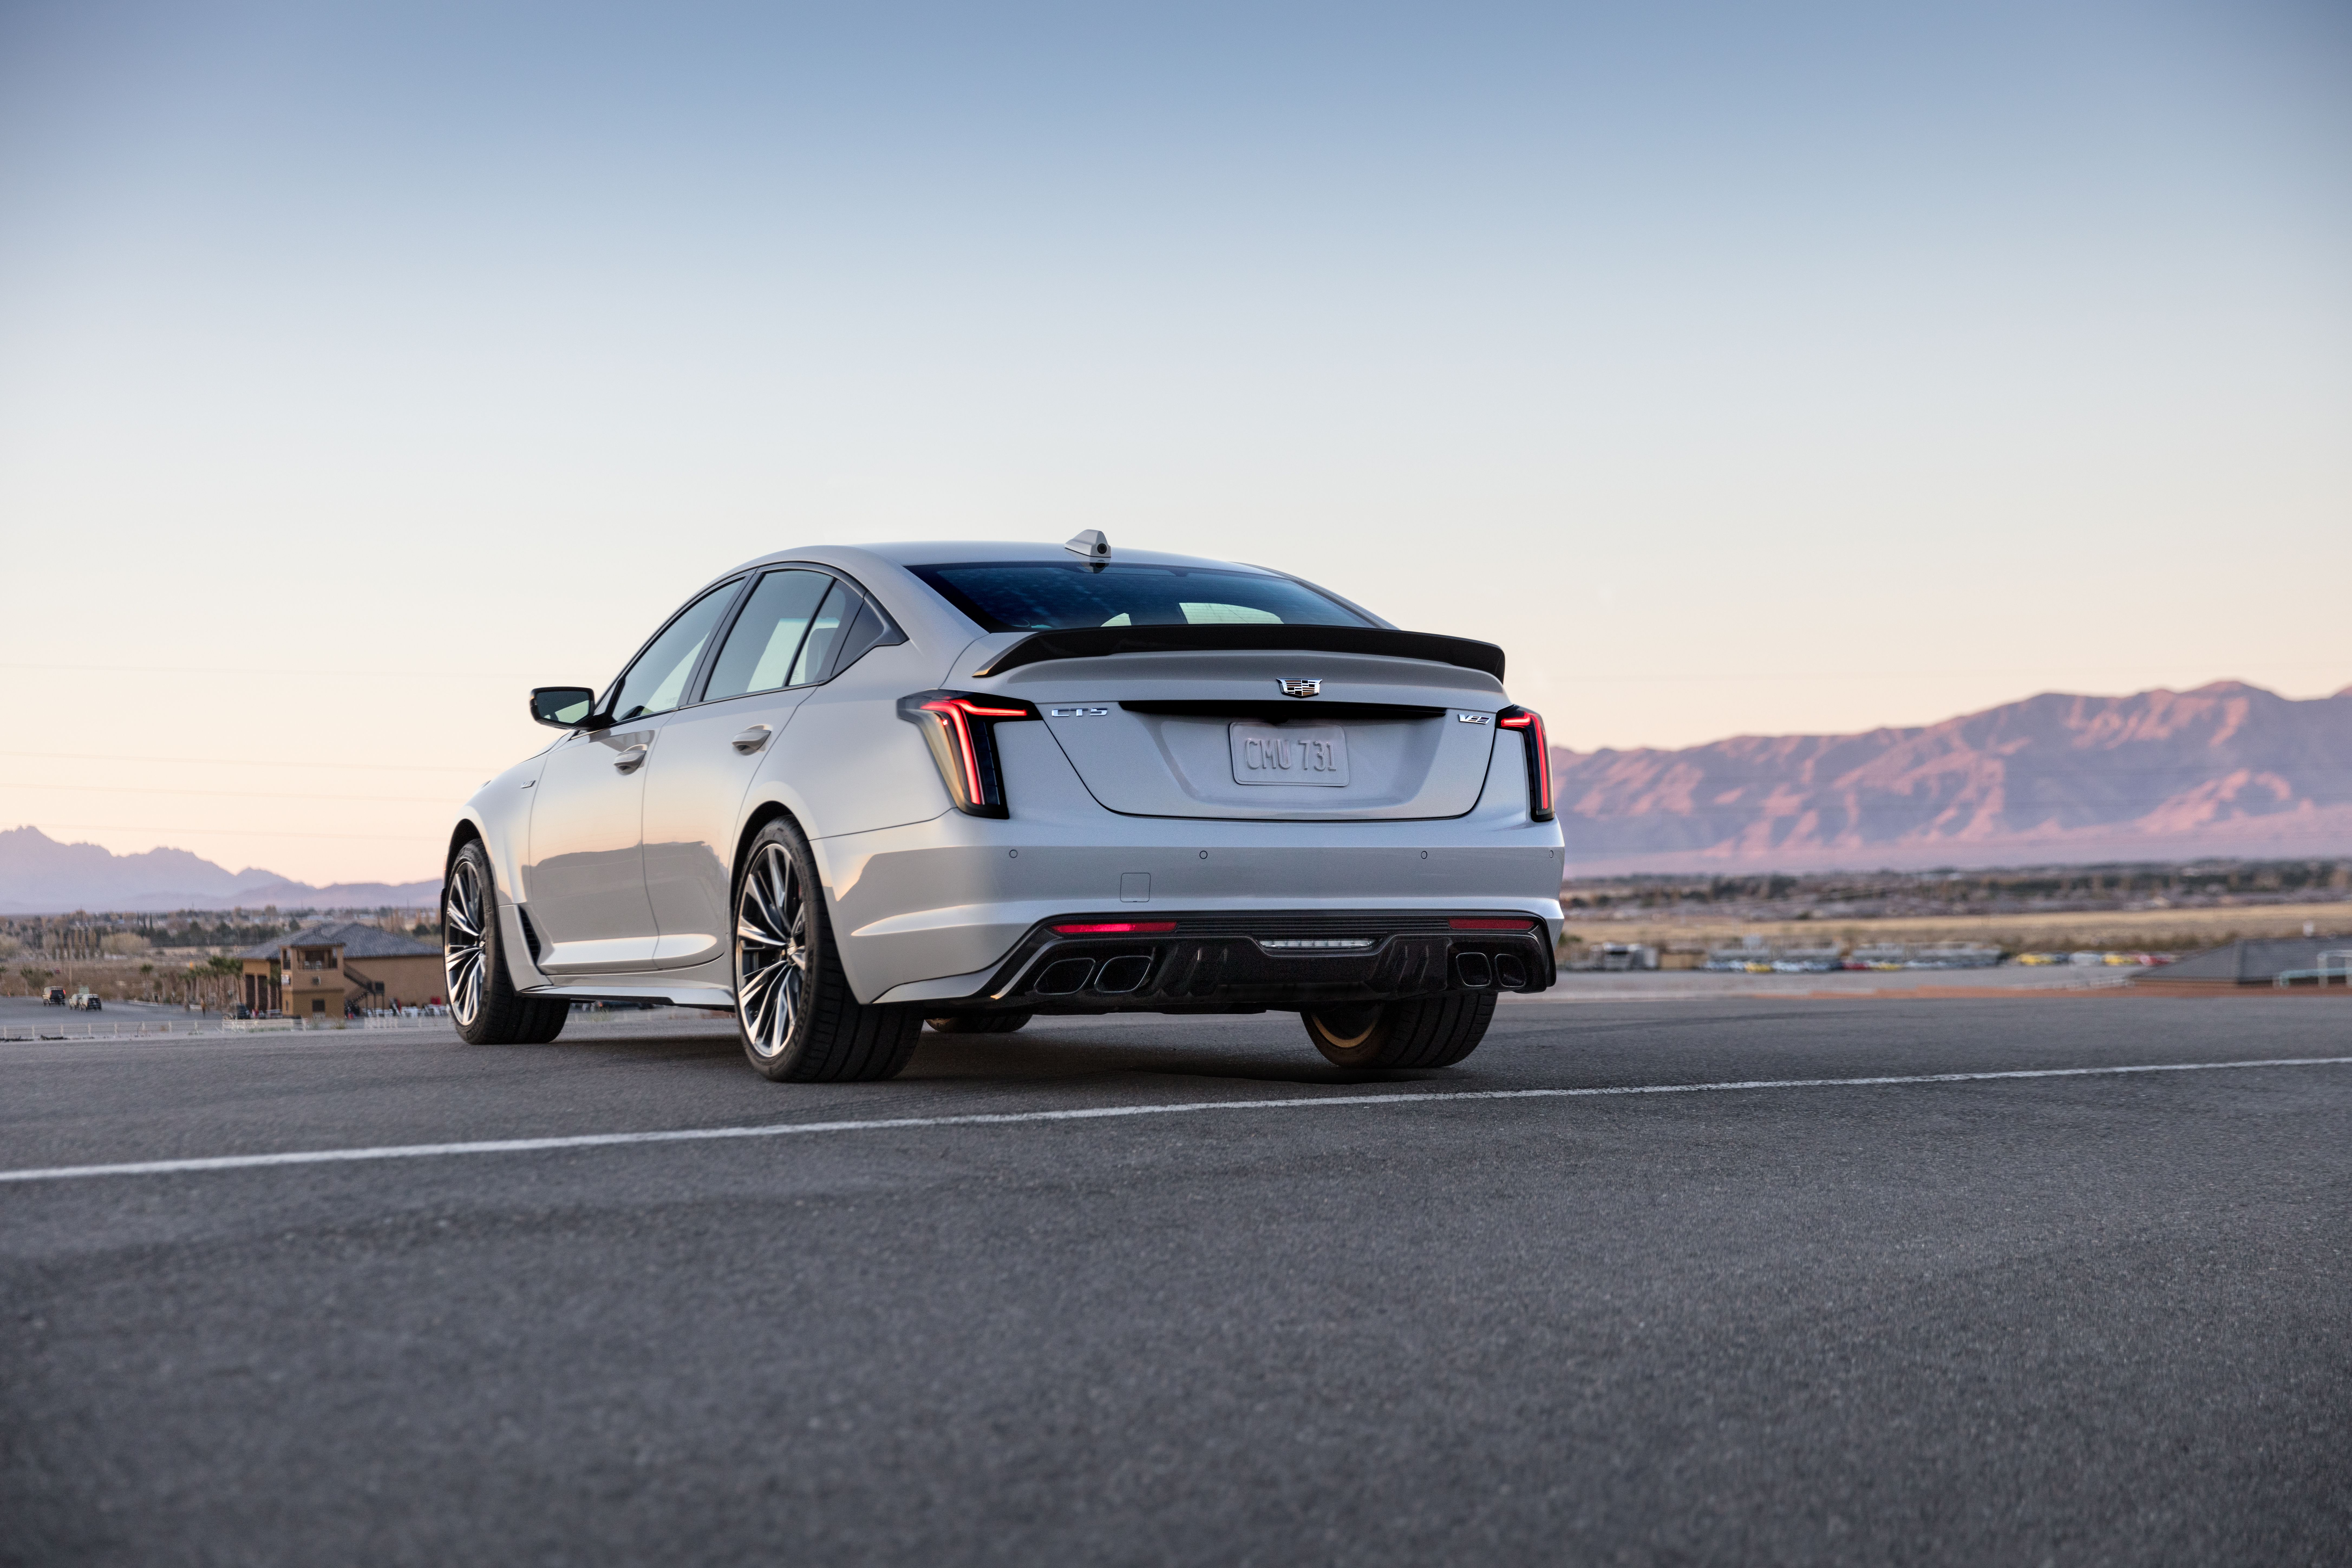 2021 2022 Cadillac CT5-V Blackwing Performance Rundown: How Does It Compare to The BMW M5 and Mercedes-AMG E63?